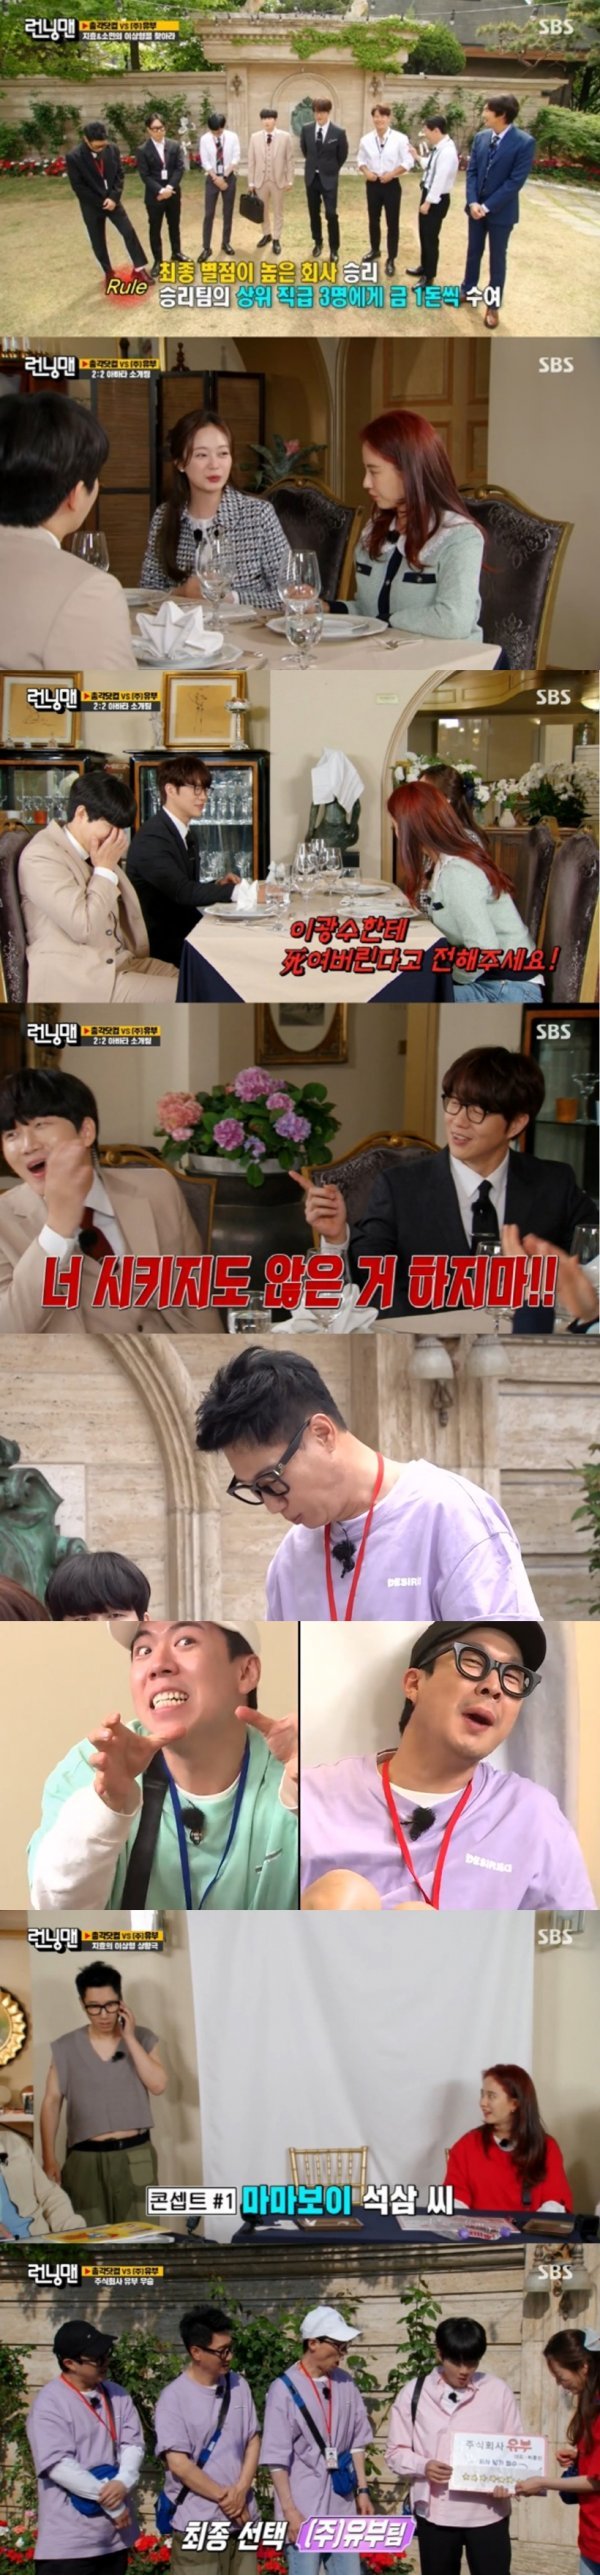 Running Man, which aired on the 23rd, recorded an average of 3% of SBSs main target, 2049 TV viewer ratings (hereinafter based on Nielsen Korea metropolitan area and households), and 6.6% of the highest TV viewer ratings per minute.The broadcast was conducted on the day by members of the marriage information company, with Lee Yong-jin, the head of the disassembled married team (Inc. Yubu), and Sung Si-kyung, the head of the unmarried team (Bachelor.com), and Kim Jong-kook, Lee Kwang-soo and Yang Se-chan, the staff members, teaming up with Race.Highlights of this race were Song Ji-hyo and Jeon So-mins Avatar blind date, which appeared as clients.Song Ji-hyo did not want to make a big difference in the blind date, saying, Marriage is not the purpose, but Love Frog Jeon So-min laughed at the start.Jeon So-min said in Sung Si-kyungs voice, It is a voice that can not be heard in Running Man. However, Sung Si-kyung laughed with a faithful appearance on the Avatar blind date.Sung Si-kyung said, Give me a little money with the menu order, poured a drink on the bread or ate bread with his mouth, and Lee Yong-jin also laughed Song Ji-hyo and Jeon So-min with a song and a buzzword.Since then, the members have consulted on their love affairs based on the audiences SNS story, and also conducted a Love Balance Game to find the ideal type of Song Ji-hyo and Jeon So-min.Each team had to create a problem that Song Ji-hyo and Jeon So-min were hard to Choice, with Jeon So-min Choicesing the bachelor dot-com team that presented Yang Se-chan VS Thumb Riding Lee Ji-hoon who only looked at one thing in his life, while Song Ji-hyo also took the Won Bin VS cockroach supplements that came out of his bachelor dot-com team Kim Jong-kook was ChoicesIn the final mission, a two-minute ideal situation drama was held.Sung Si-kyung, Lee Yong-jin challenged the Song Ji-hyo situational drama by Jeon So-min, Ji Suk-jin, and Yang Se-chan, and in particular, the appearance of Ji Suk-jin, who was divided into Suksam, was the best one minute with 6.6% of the highest TV viewer ratings per minute.The final result went back to the victory of the Inc. married team.